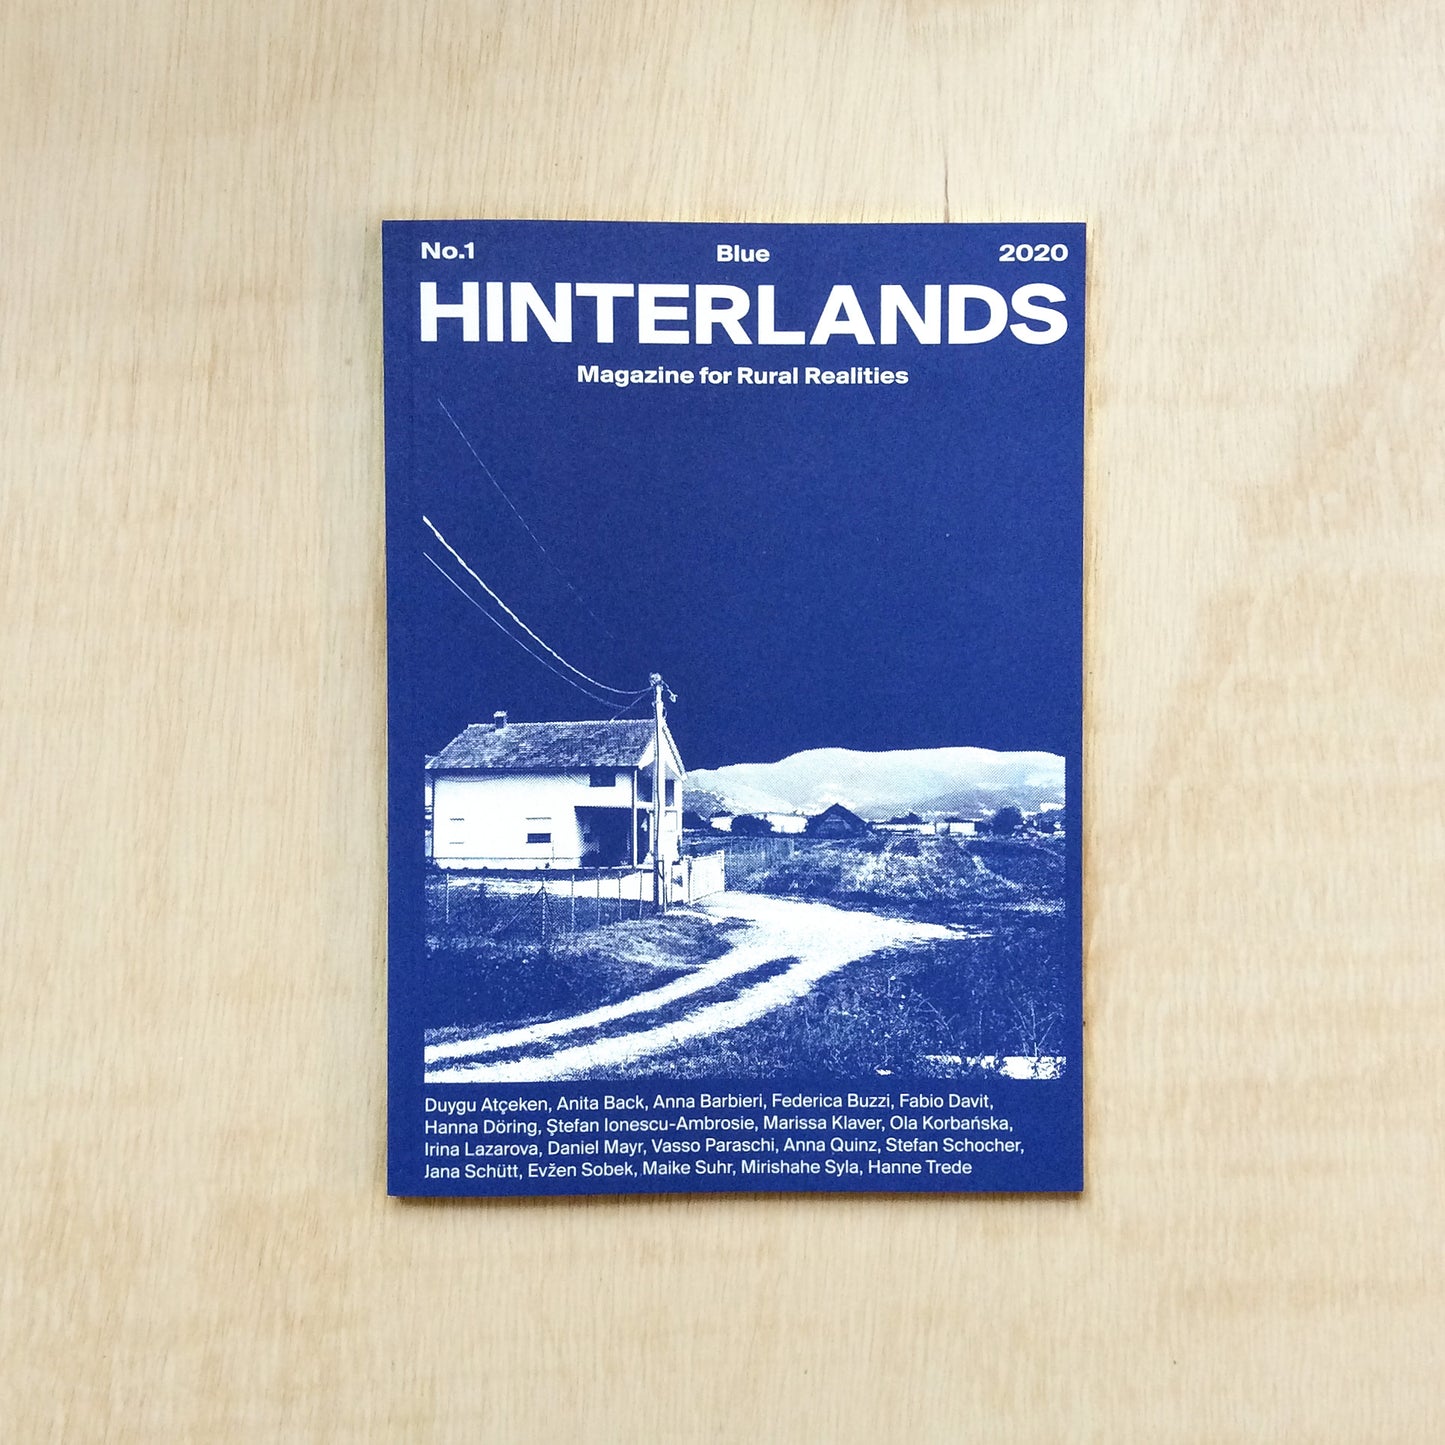 Hinterlands – magazine for rural realities - no. 1 - out of print